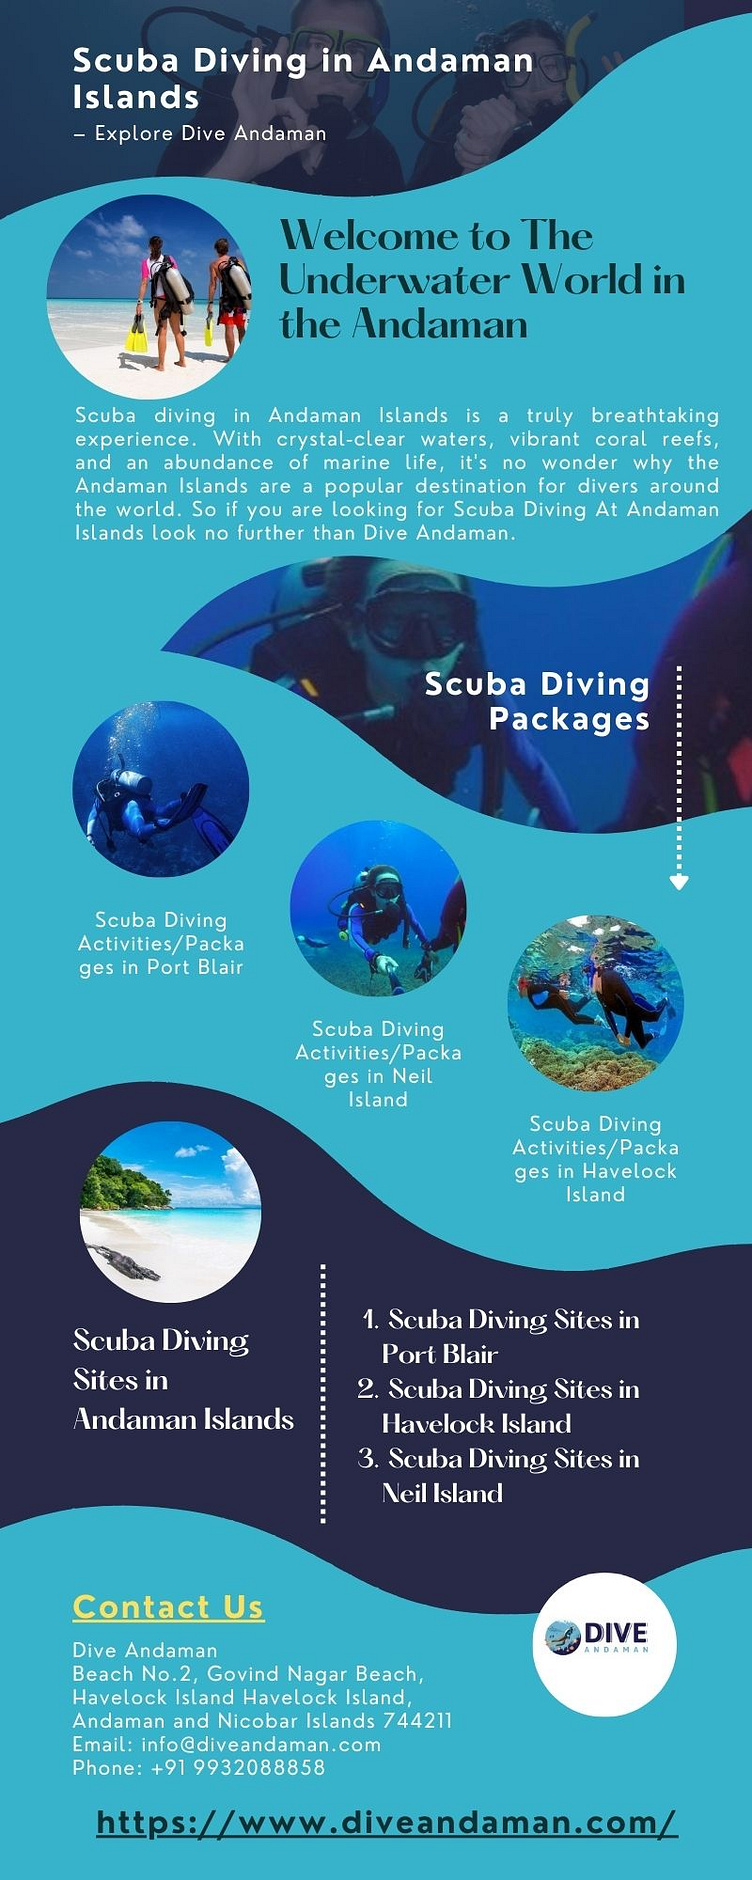 Best Scuba Diving in Andaman Islands by Dive Andaman on Dribbble